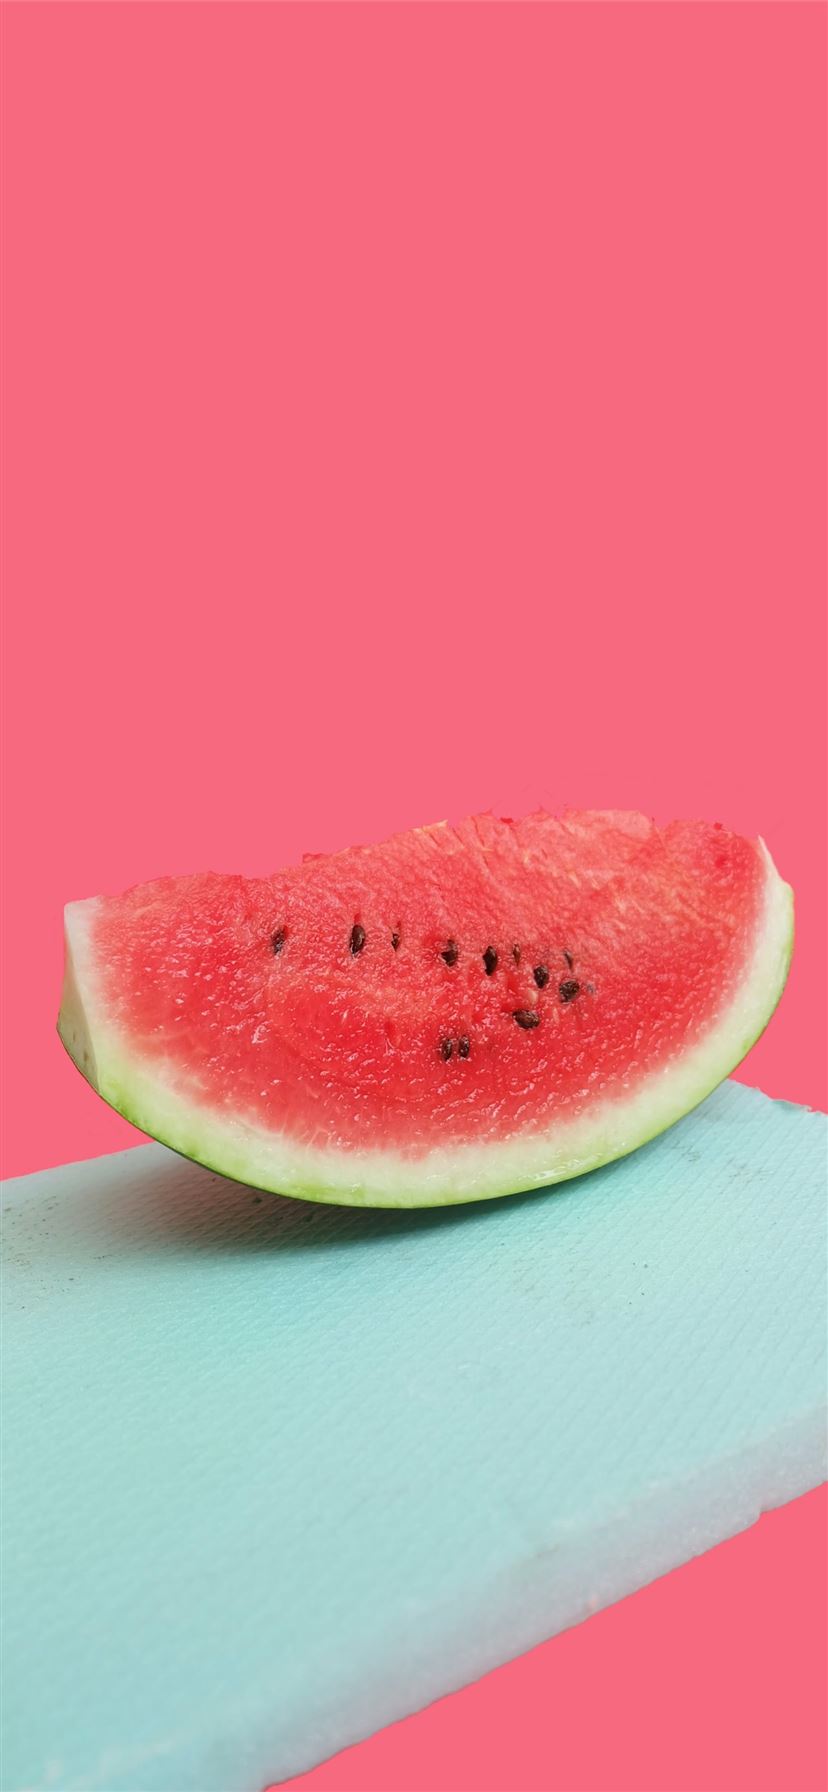 sliced watermelon iPhone 11 Wallpaper Free Download